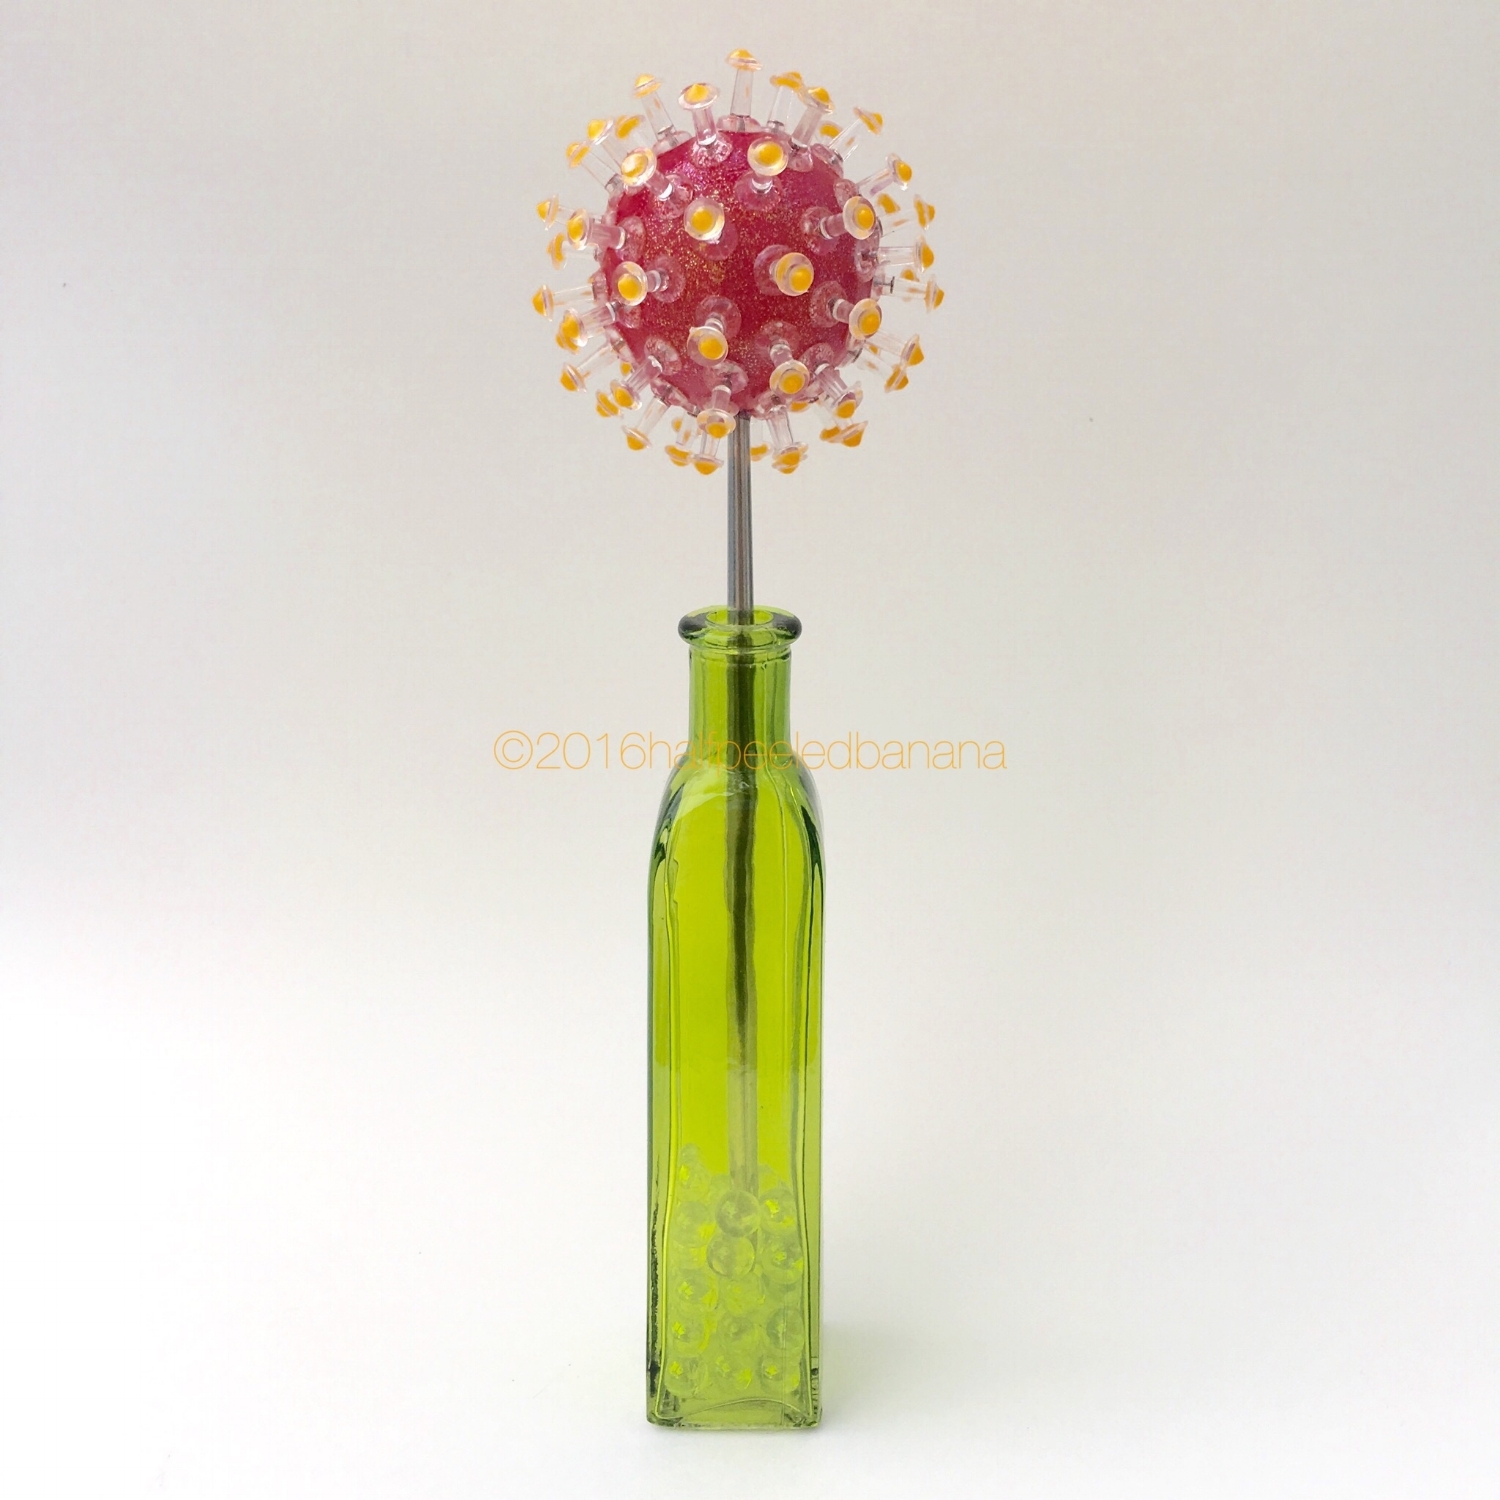 bright modern holiday or everyday decor. tabletop 3" pins style red flower with orange dots